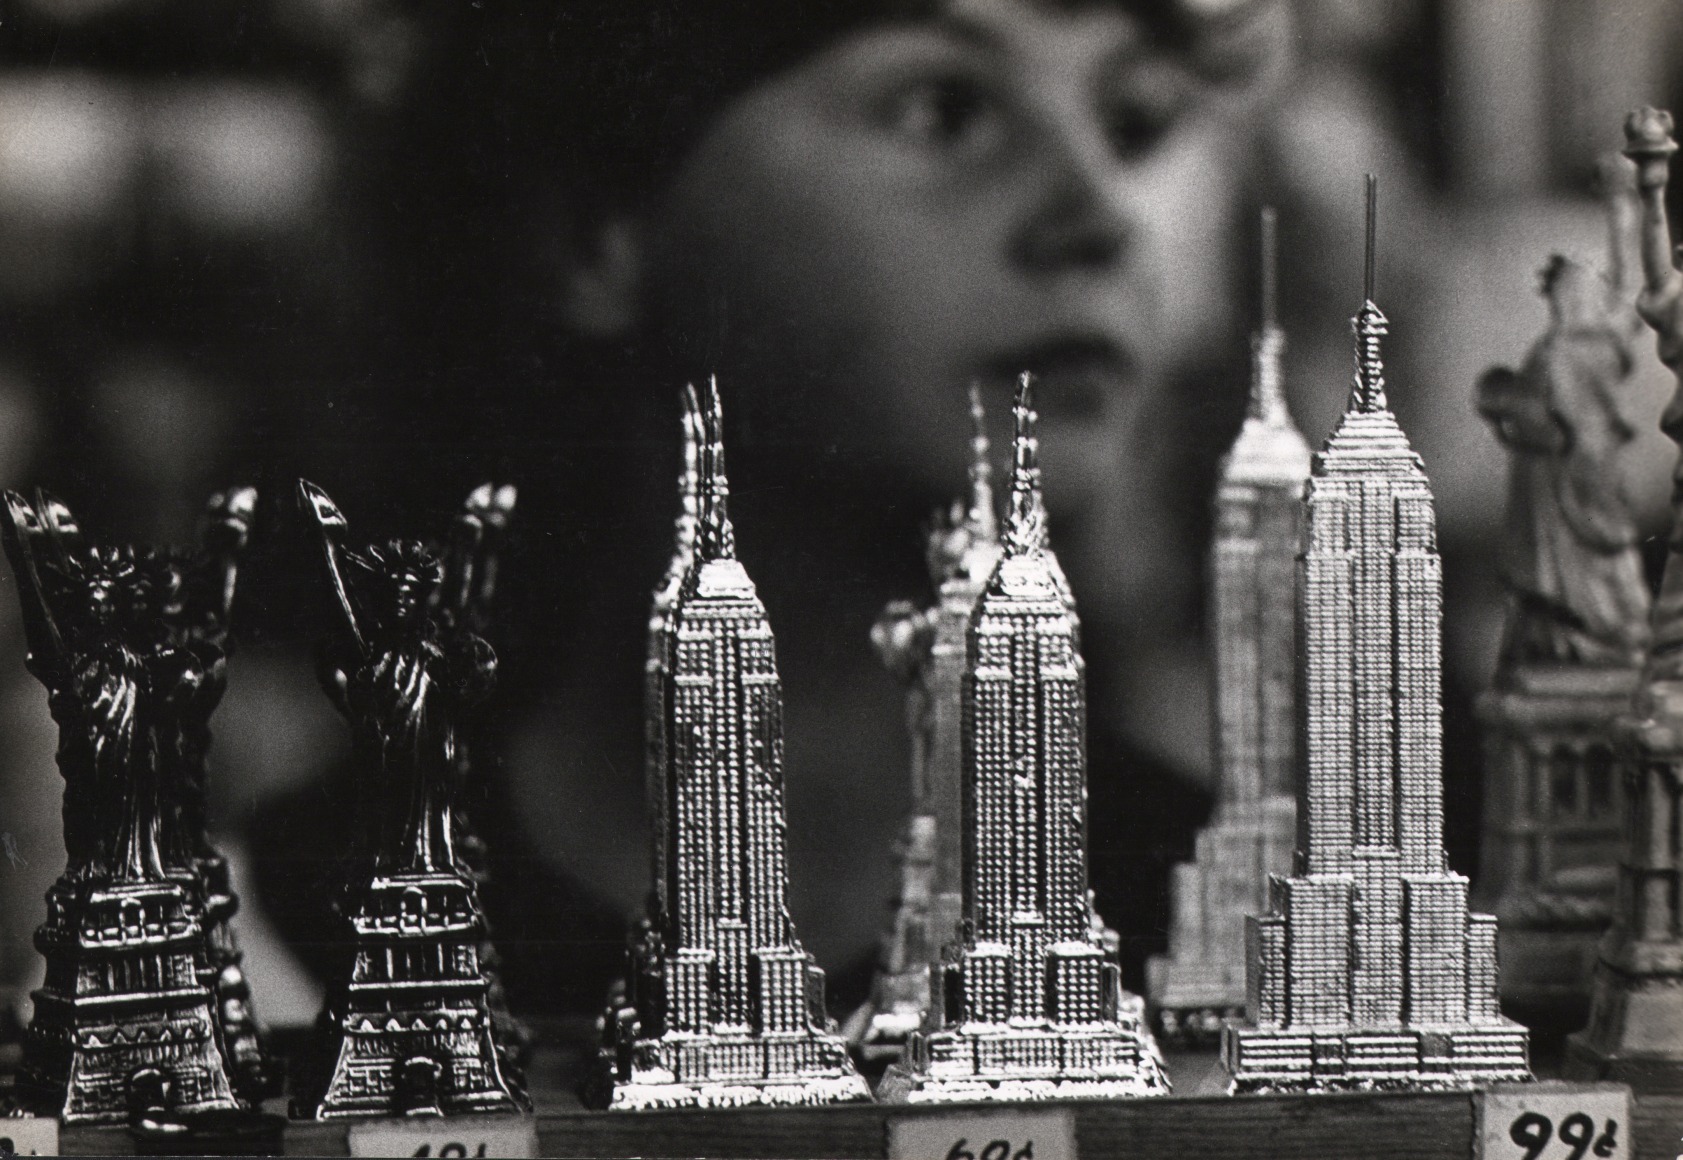 09. Jan Lukas, Souvenirs of New York, ​1964. Miniatures of the Statue of Liberty, Chrysler Building, and Empire State Building for sale on a shelf. A child's face is out of focus behind them.